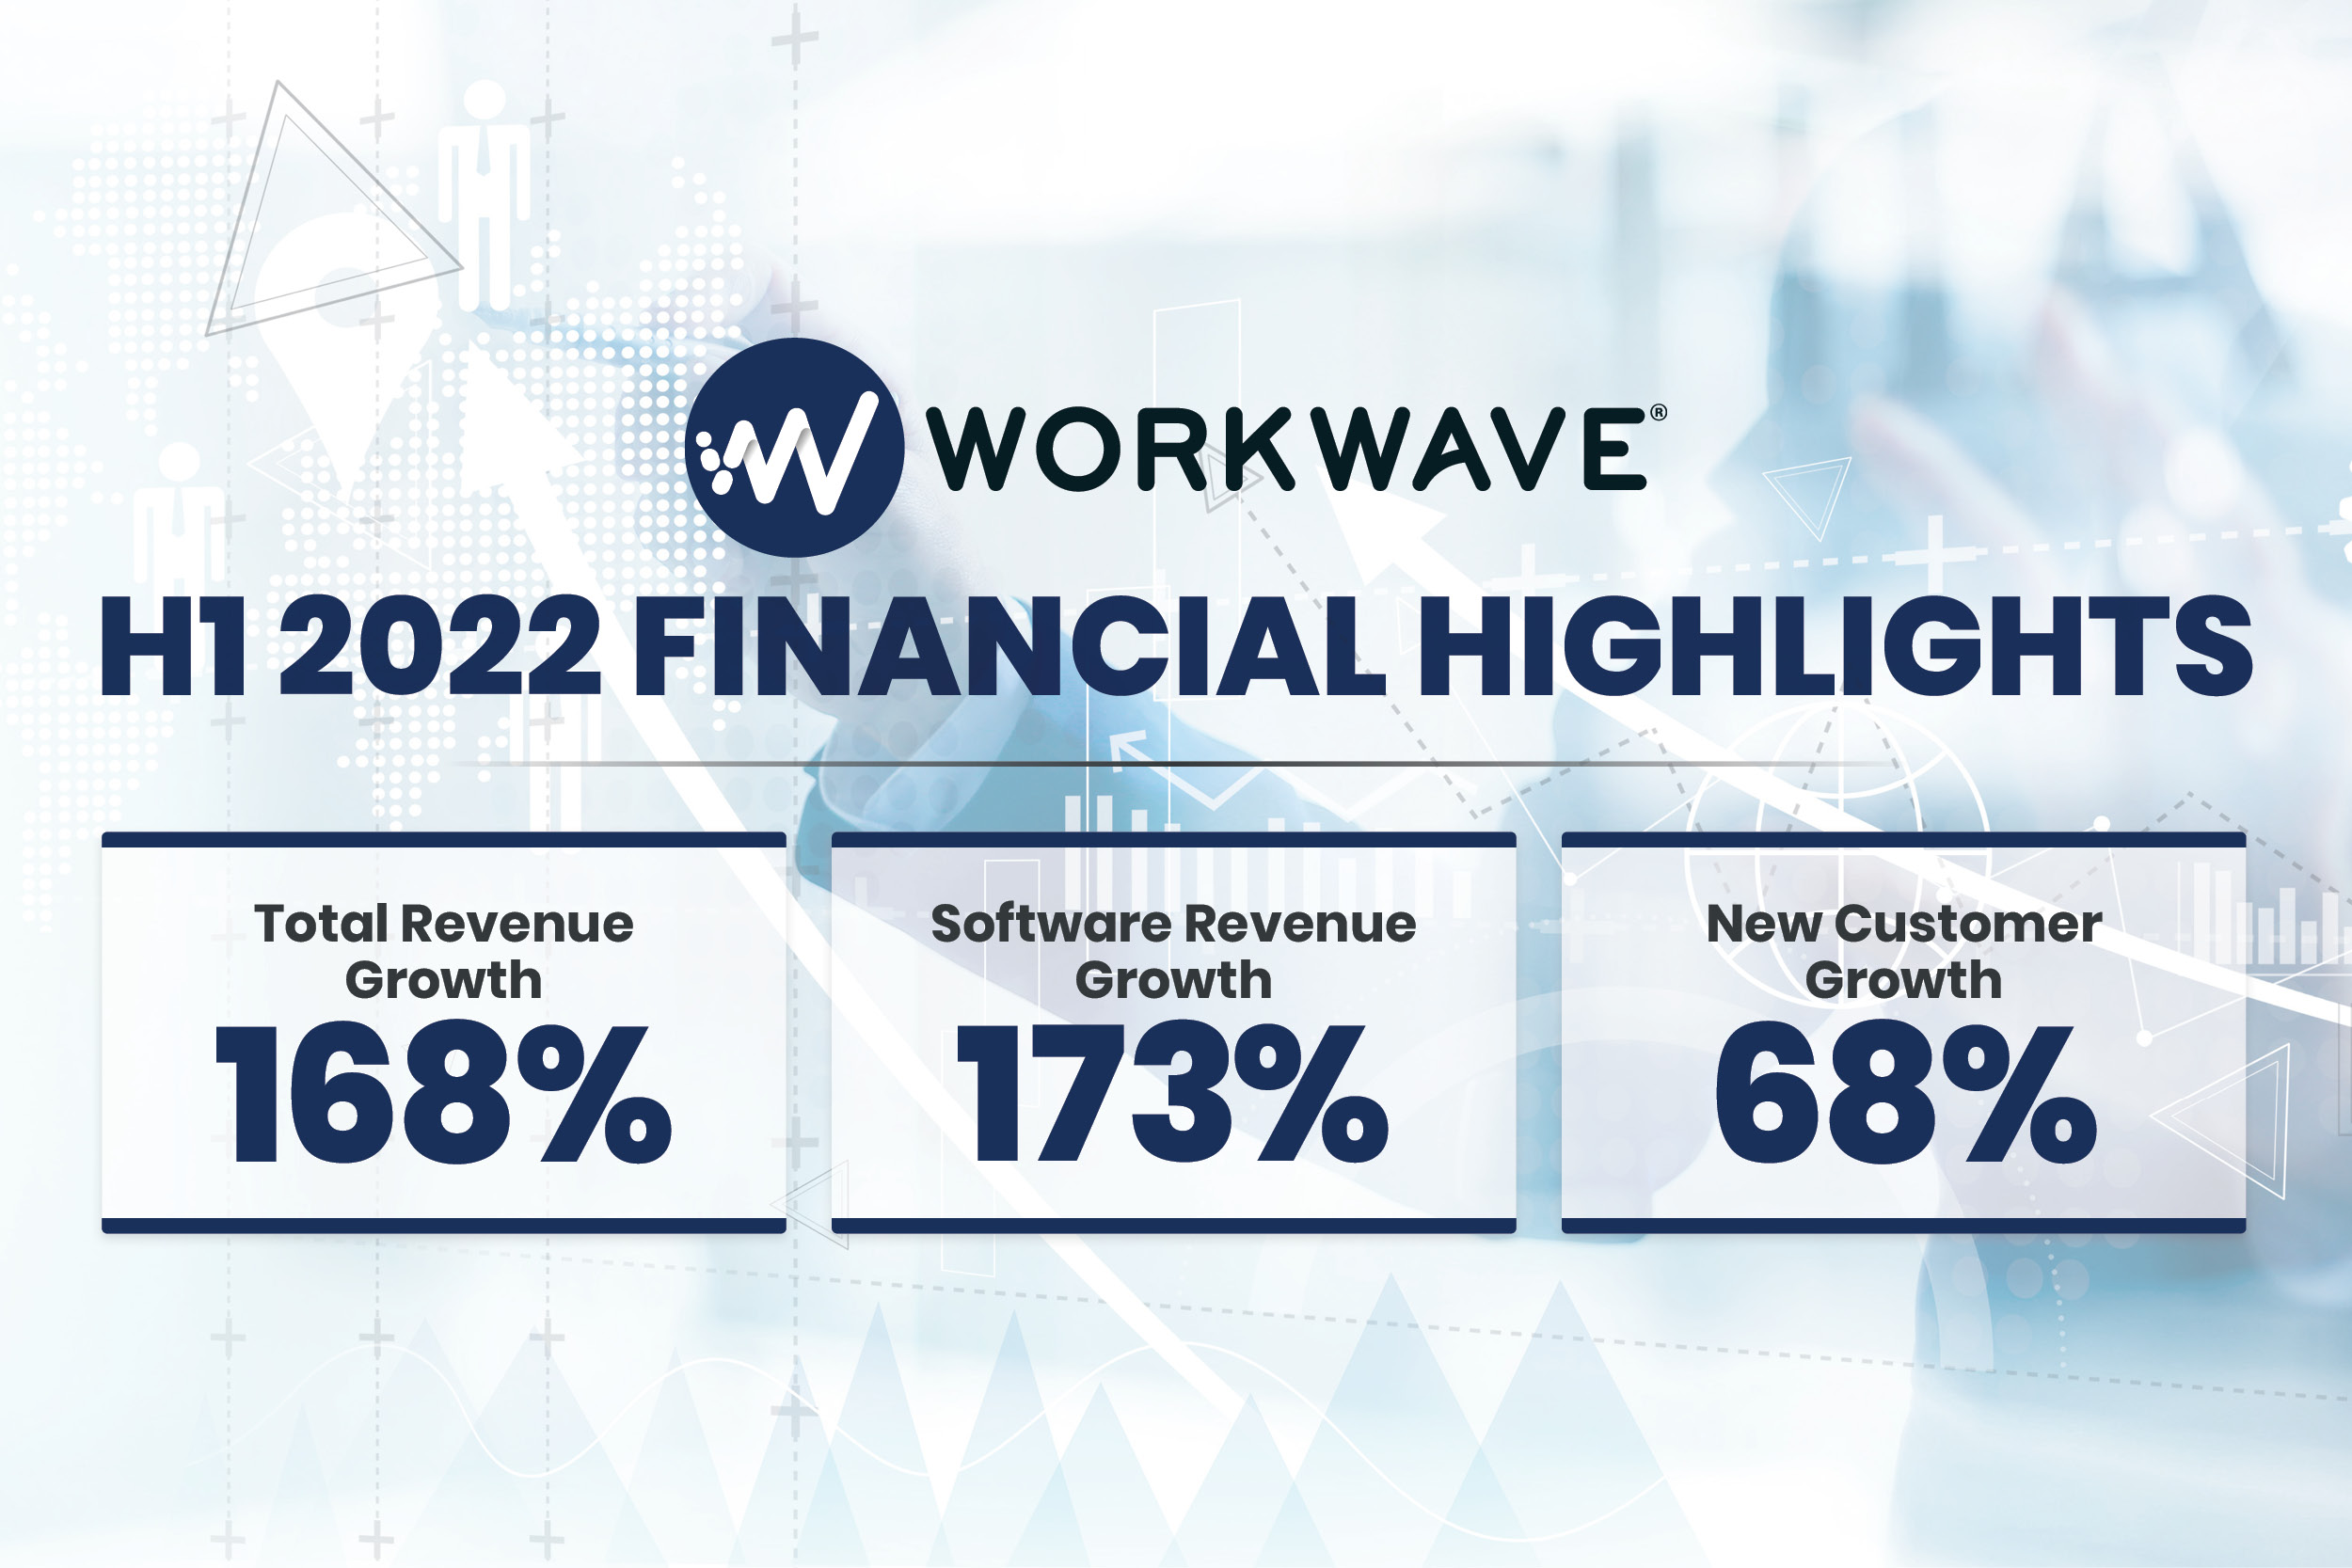 WorkWave Powers Through Q2 with 168% Revenue Growth Year-to-Date